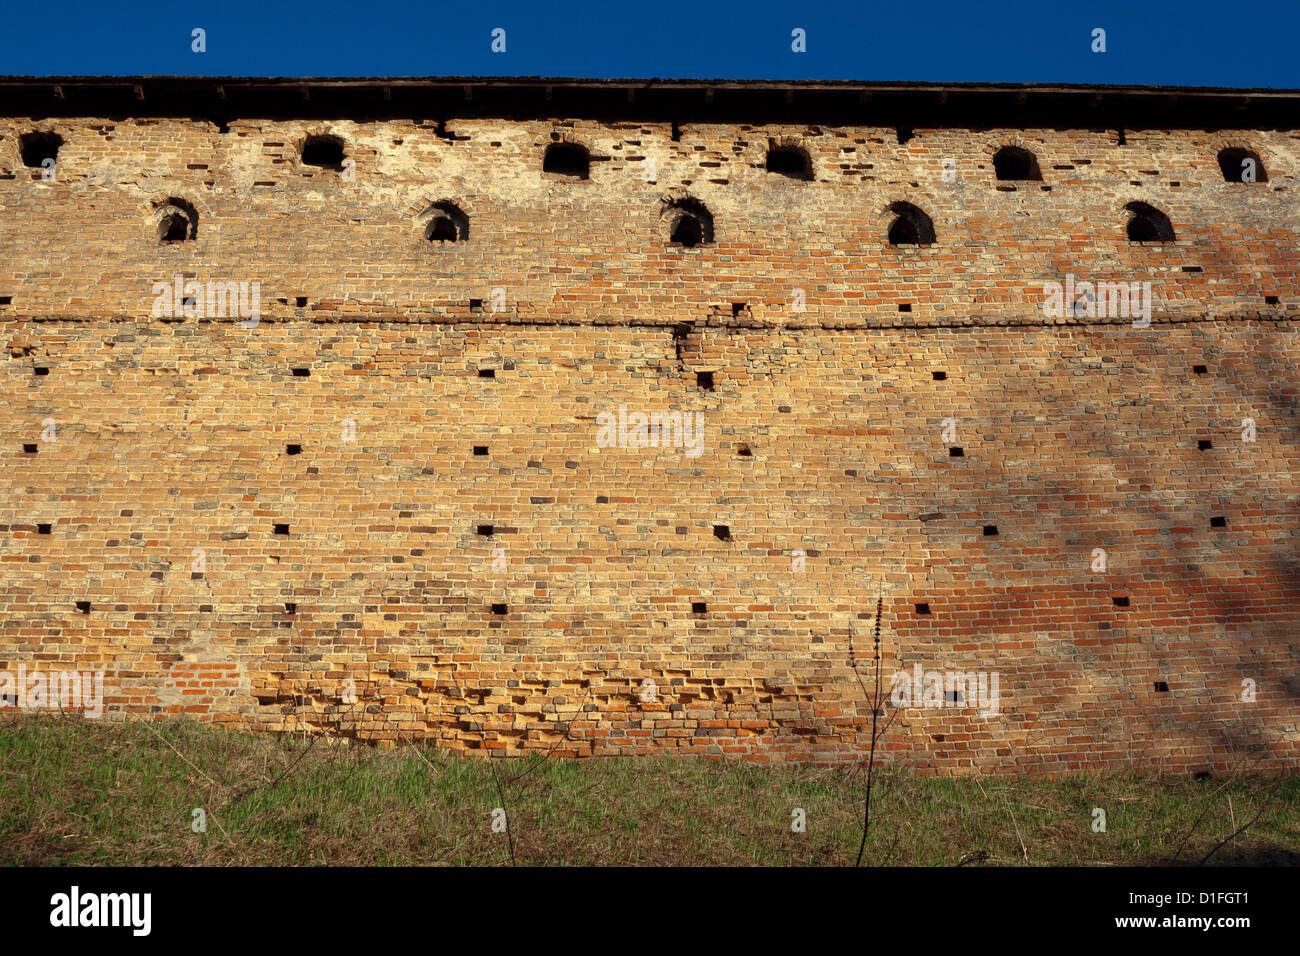 Brick wall with loopholes. Medieval castle. Stock Photo